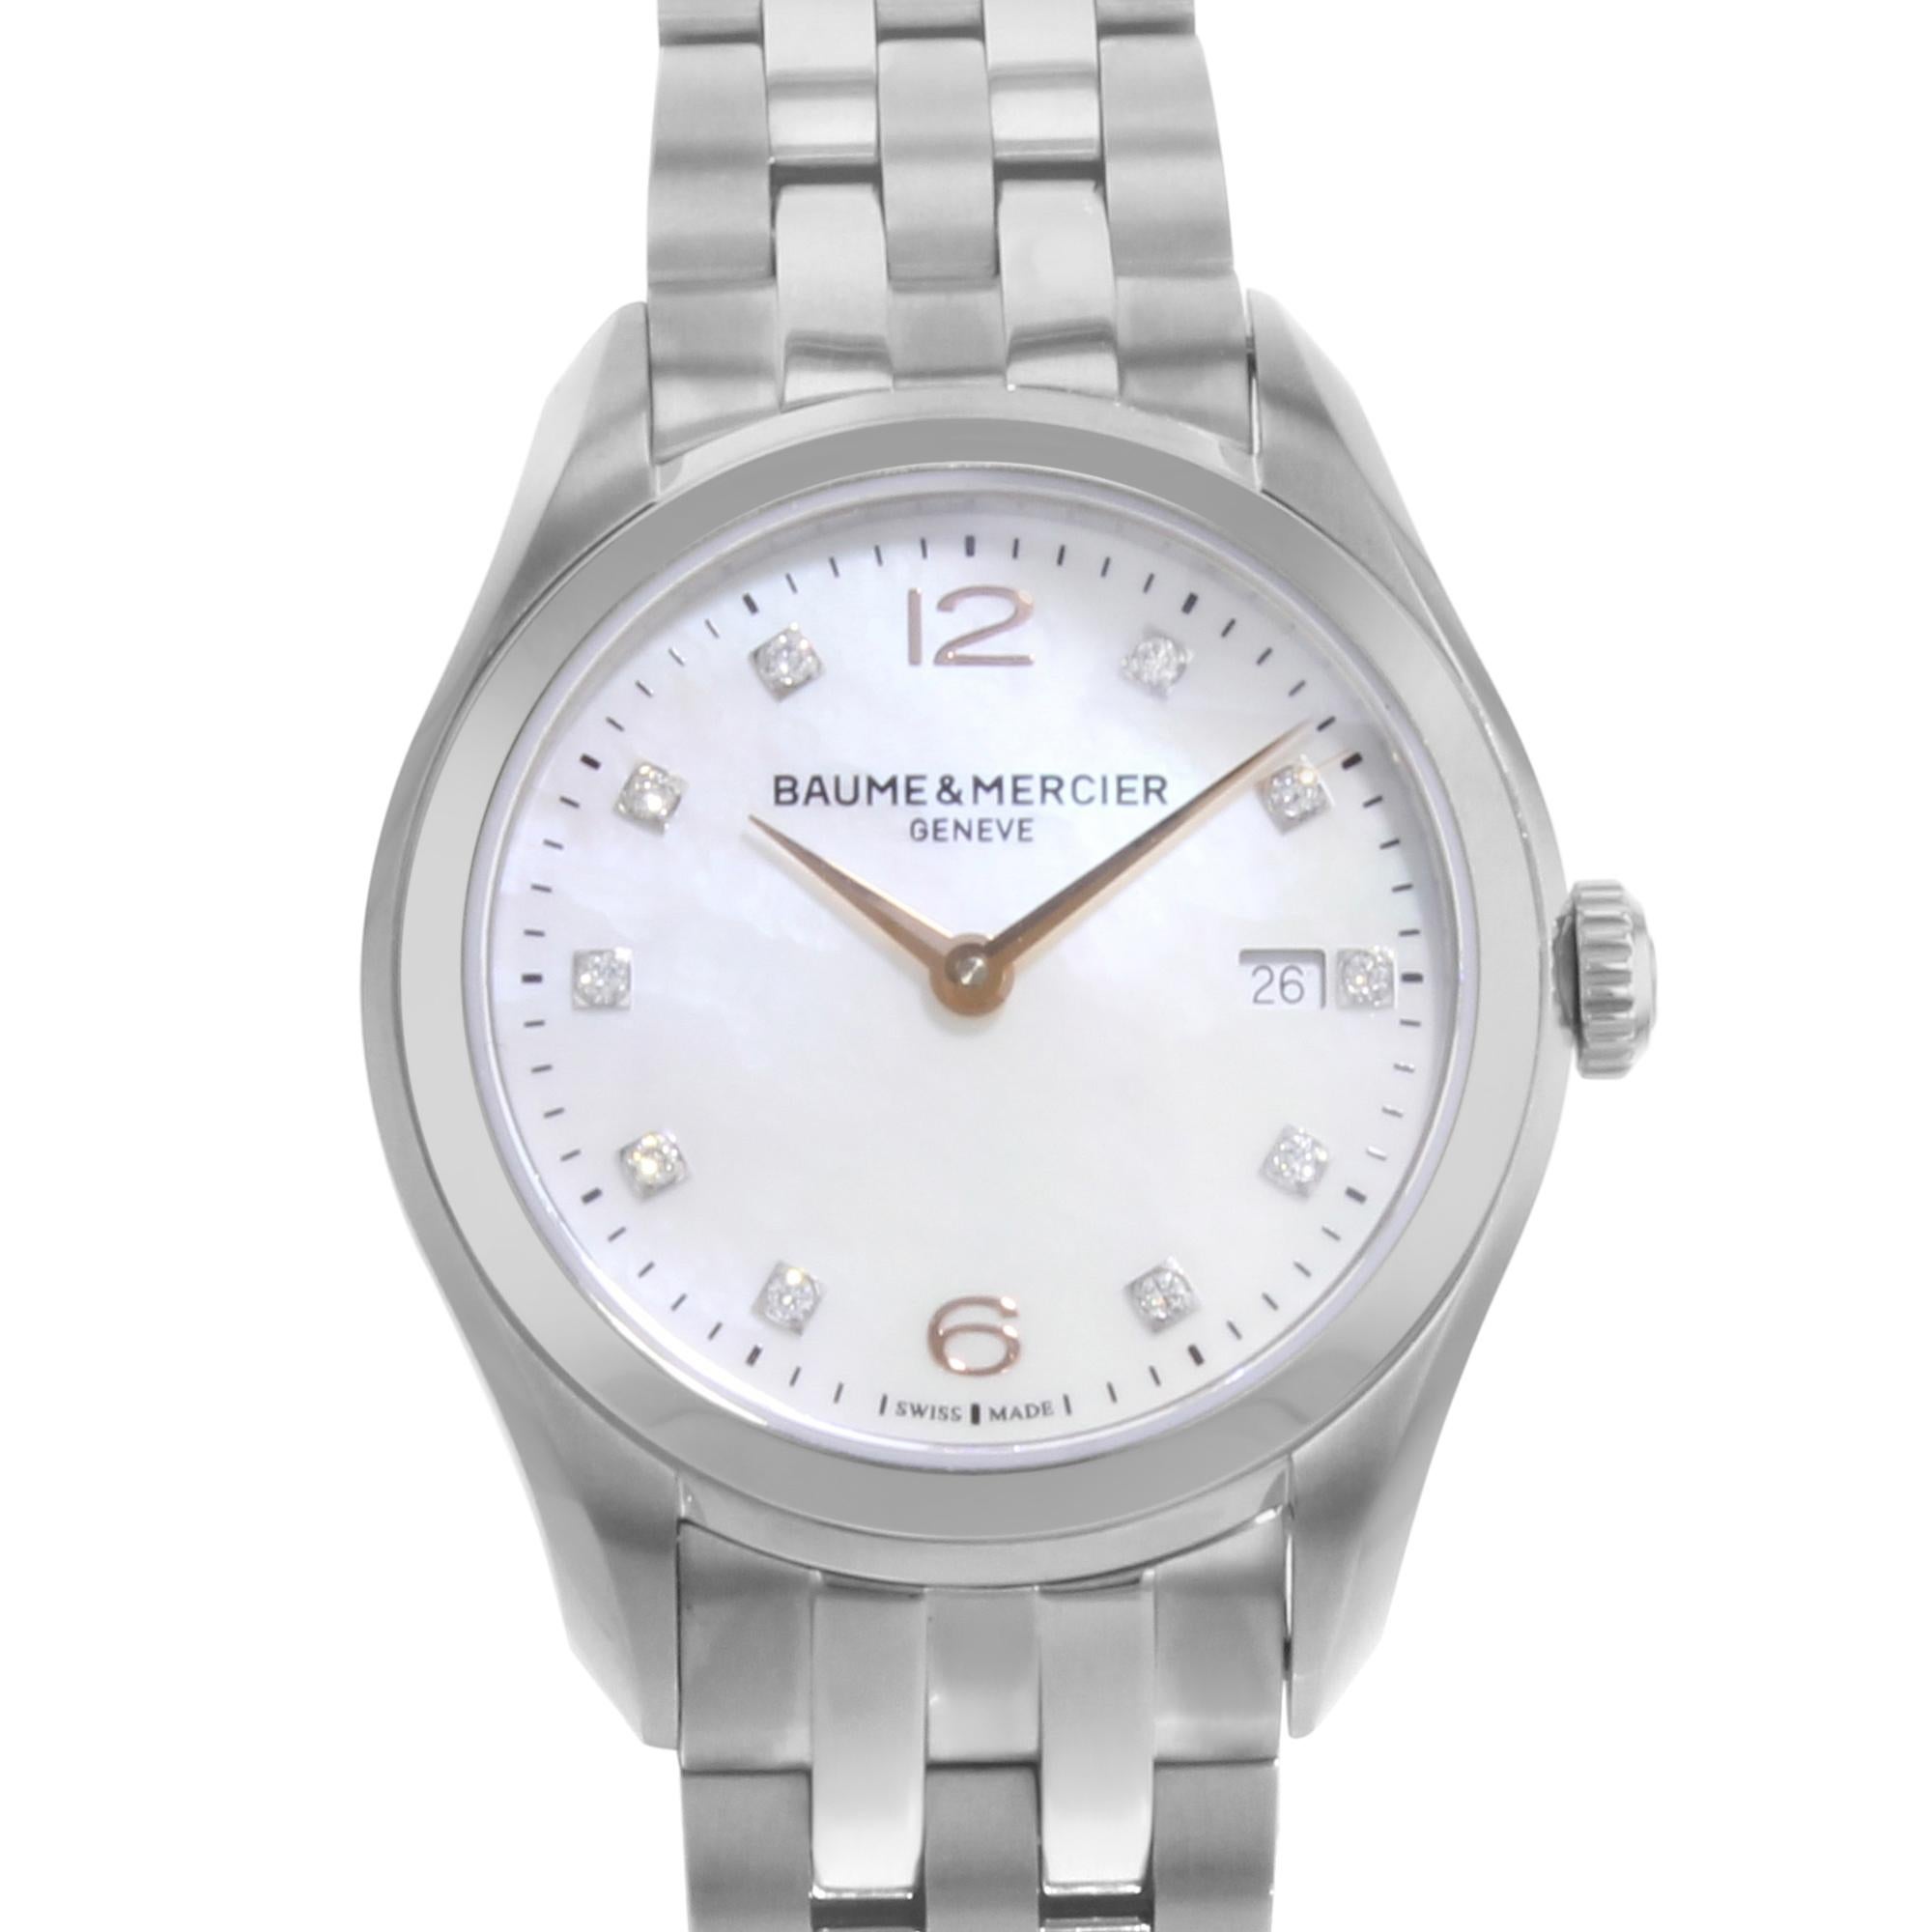 This display model Baume et Mercier Clifton MOA10176 is a beautiful Women's timepiece that is powered by a quartz movement which is cased in a stainless steel case. It has a round shape face, date, diamonds dial, and has hand Arabic numerals,